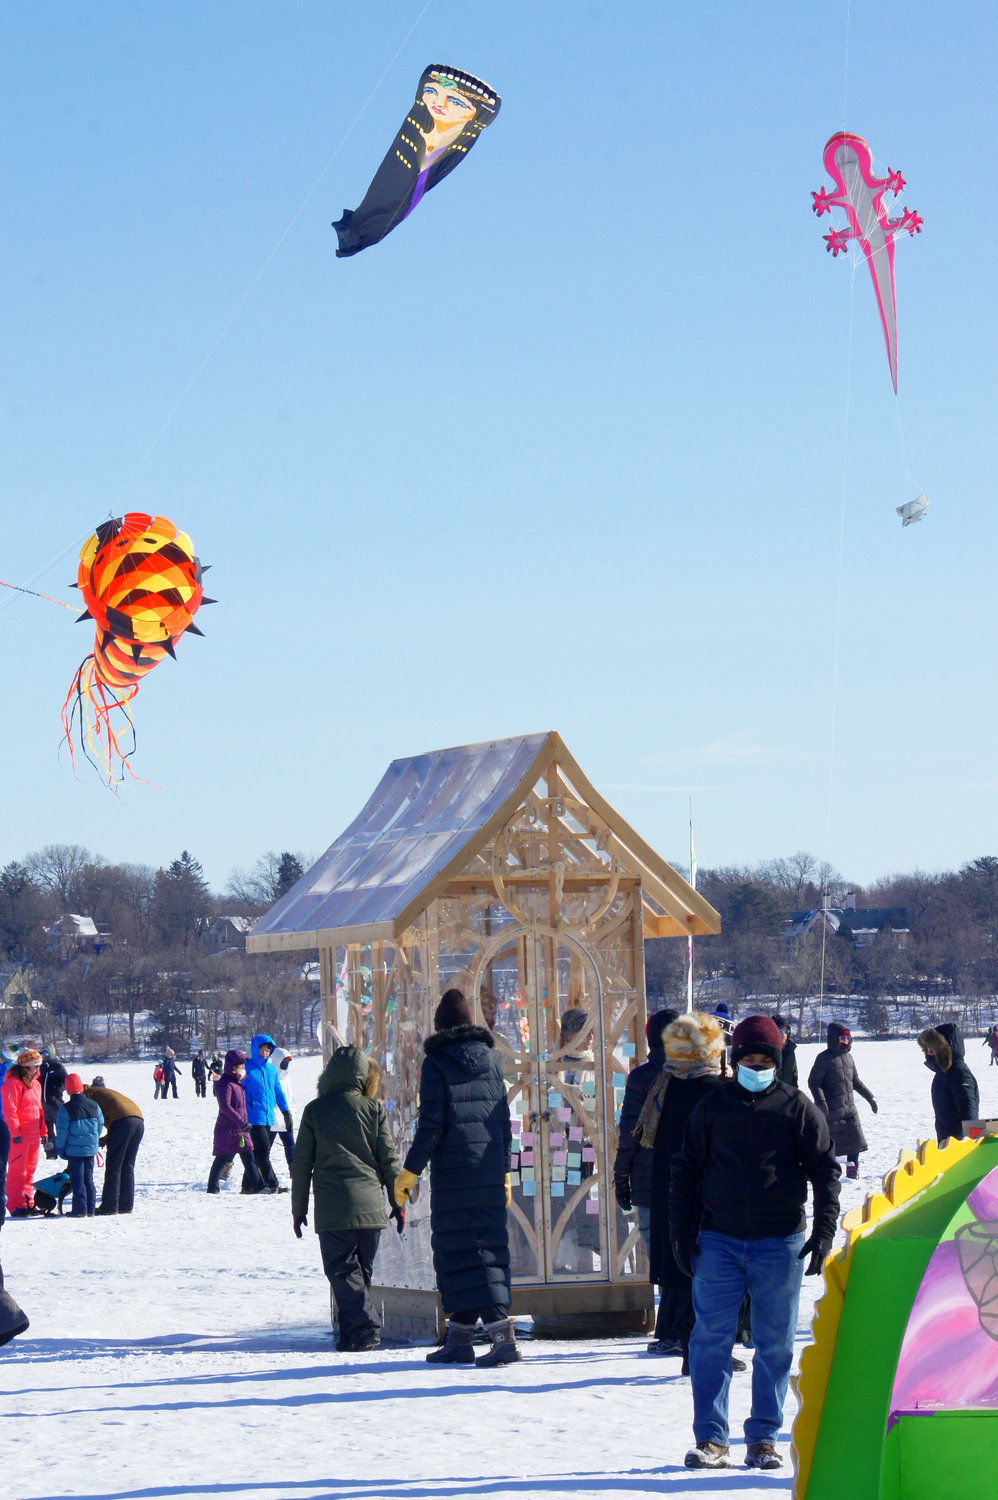 The Kite Festival had a sunny day and a good turnout. Winds were not always cooperative, but most kites made it aloft.